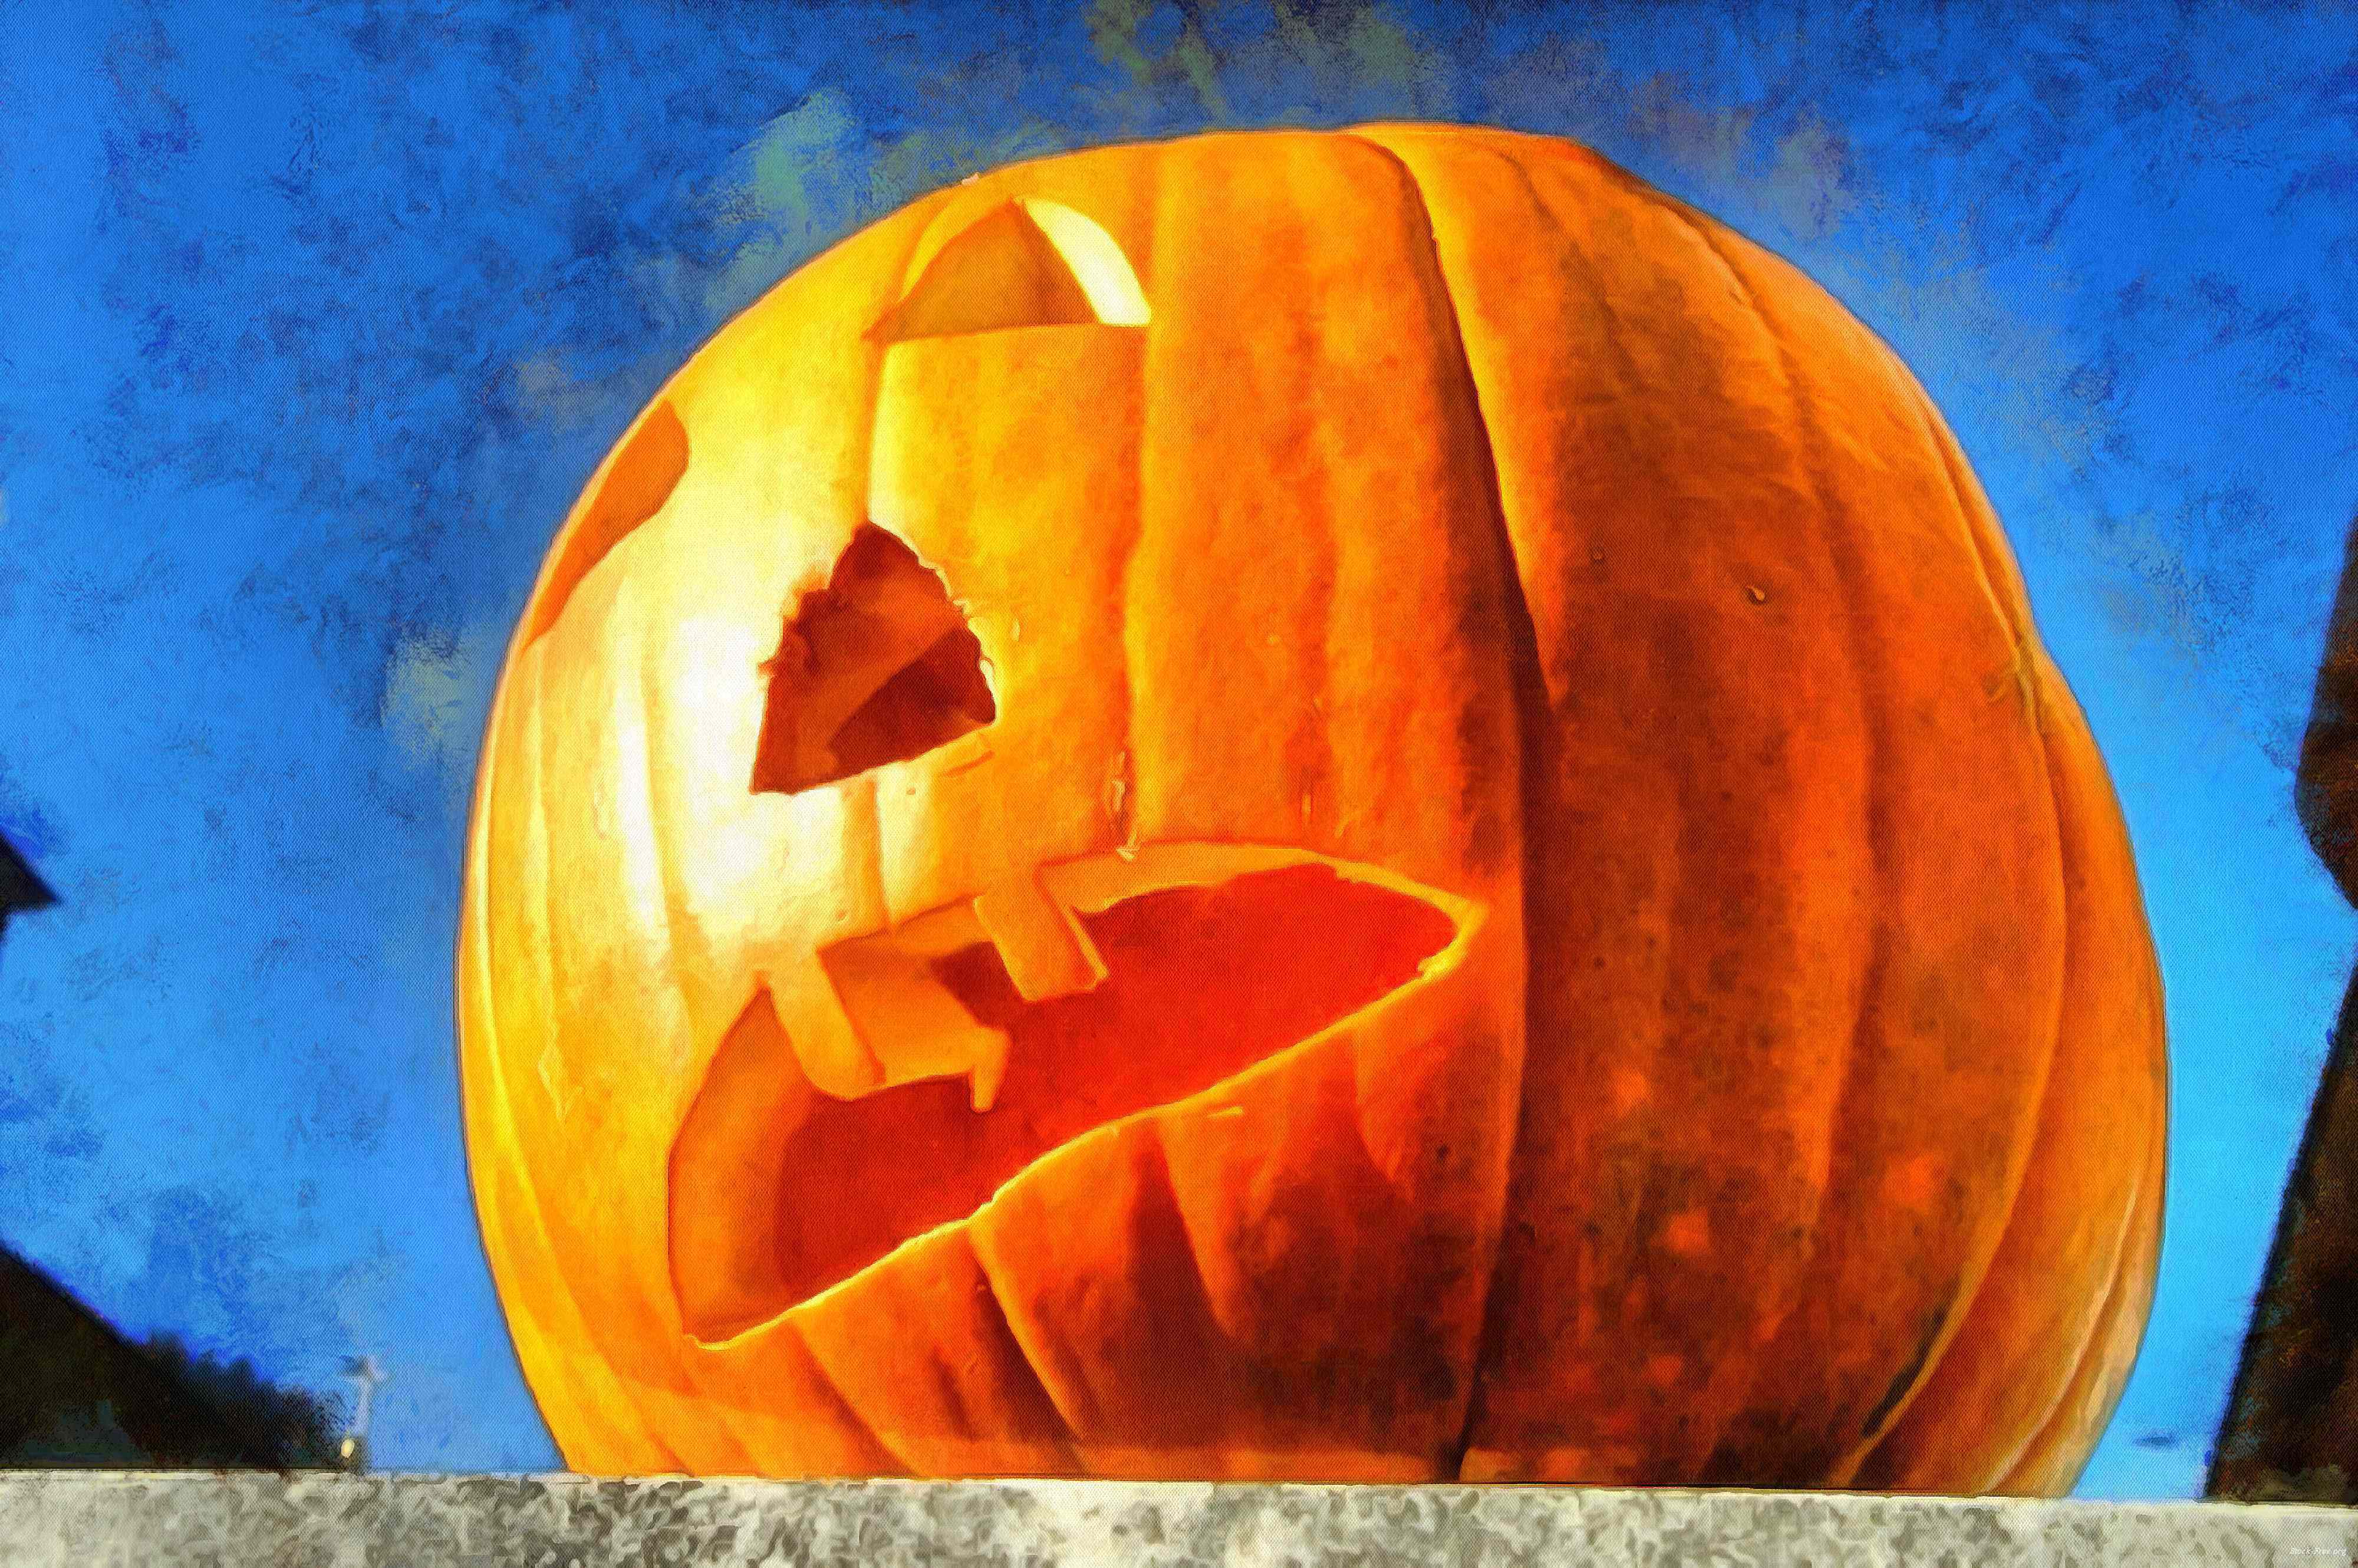 carved pumpkin, head, vegetable, flame, holiday, event, candle, celebration, Pumpkin  - halloween, free photos, free images, free stock photos, public domain images, stock free images, download free images